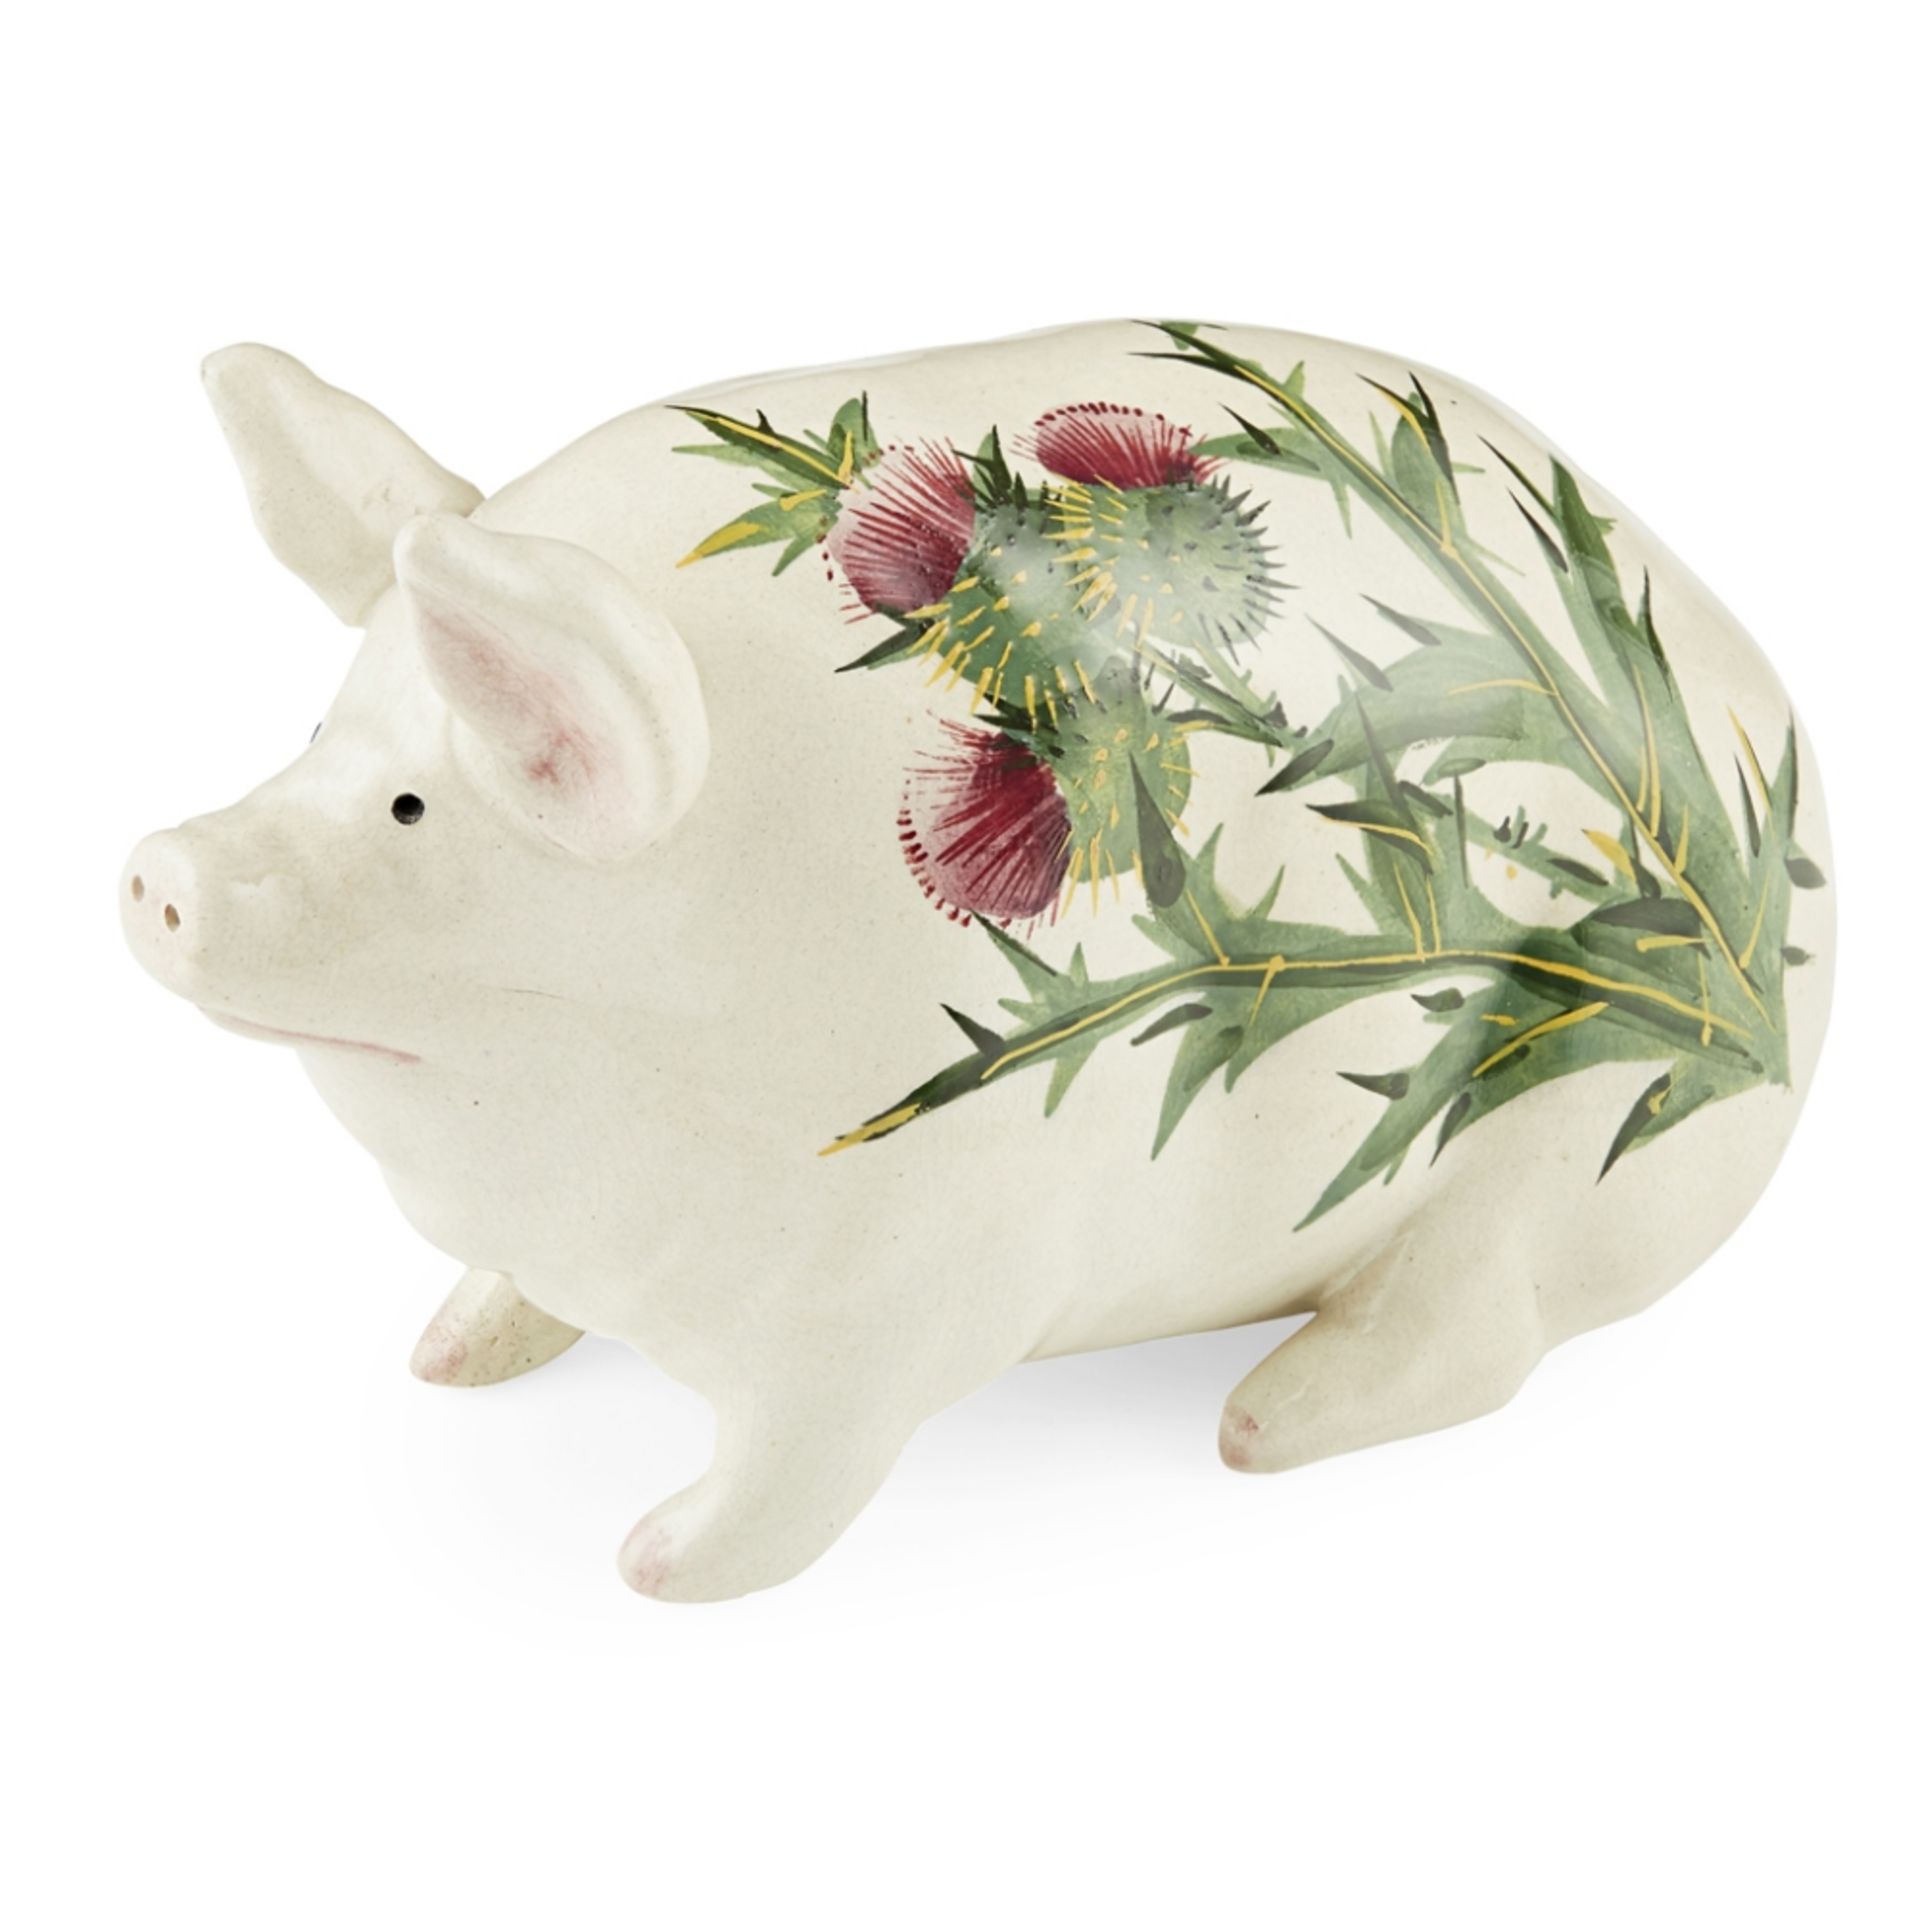 WEMYSS WARE SMALL 'THISTLES' PATTERN PIG FIGURE, CIRCA 1900 impressed and painted maker's mark '